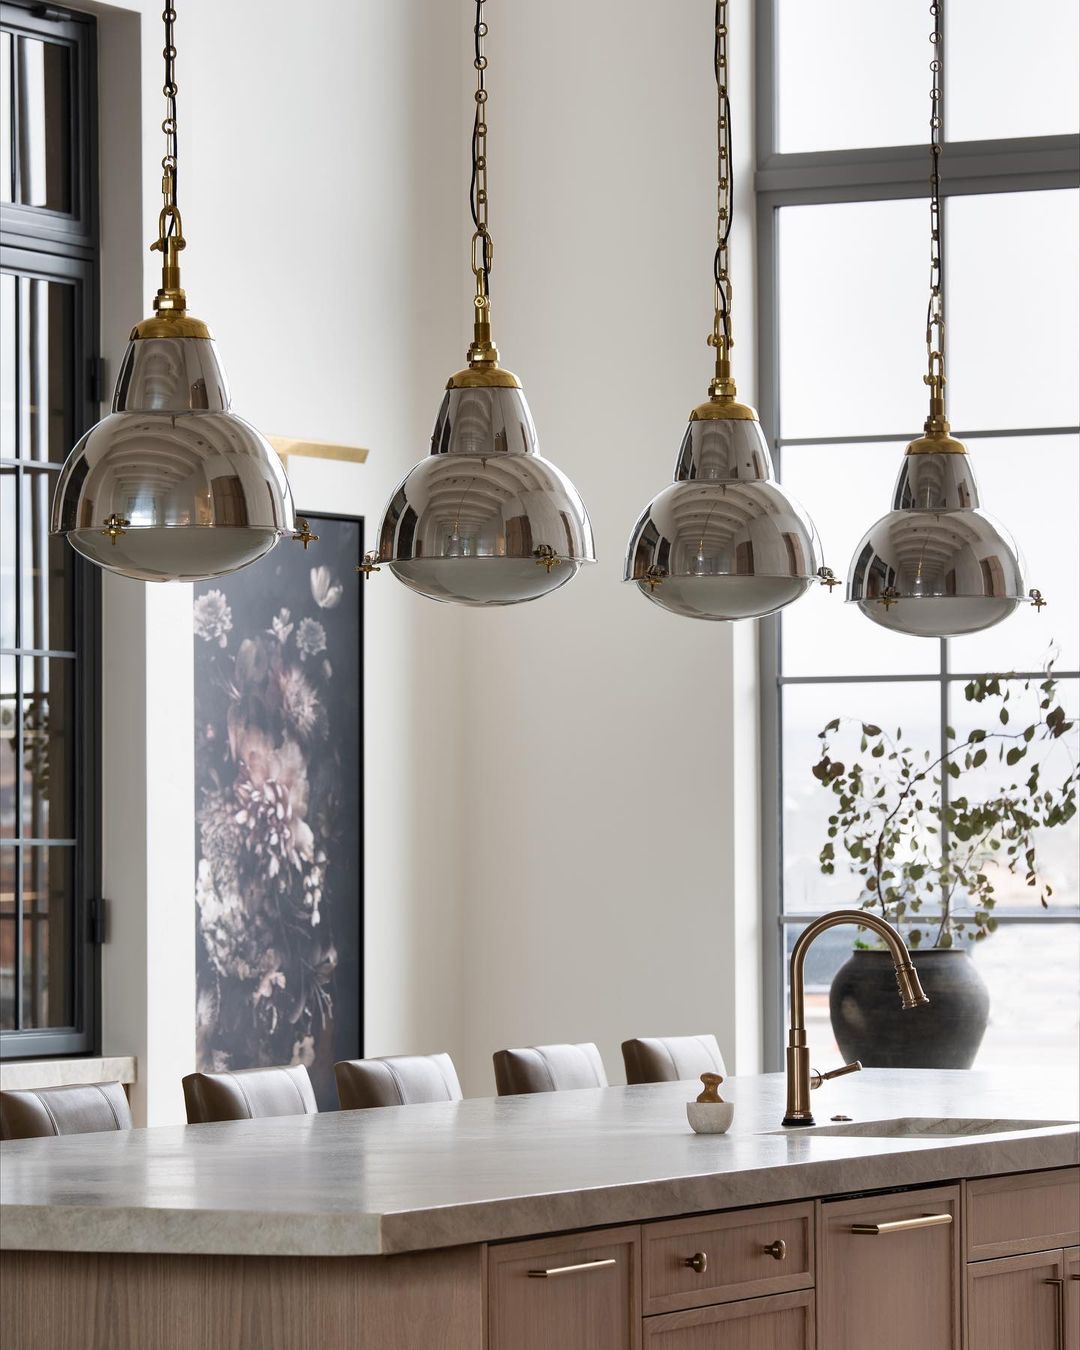 Modern Vintage: Dome Pendants and Classic Elegance